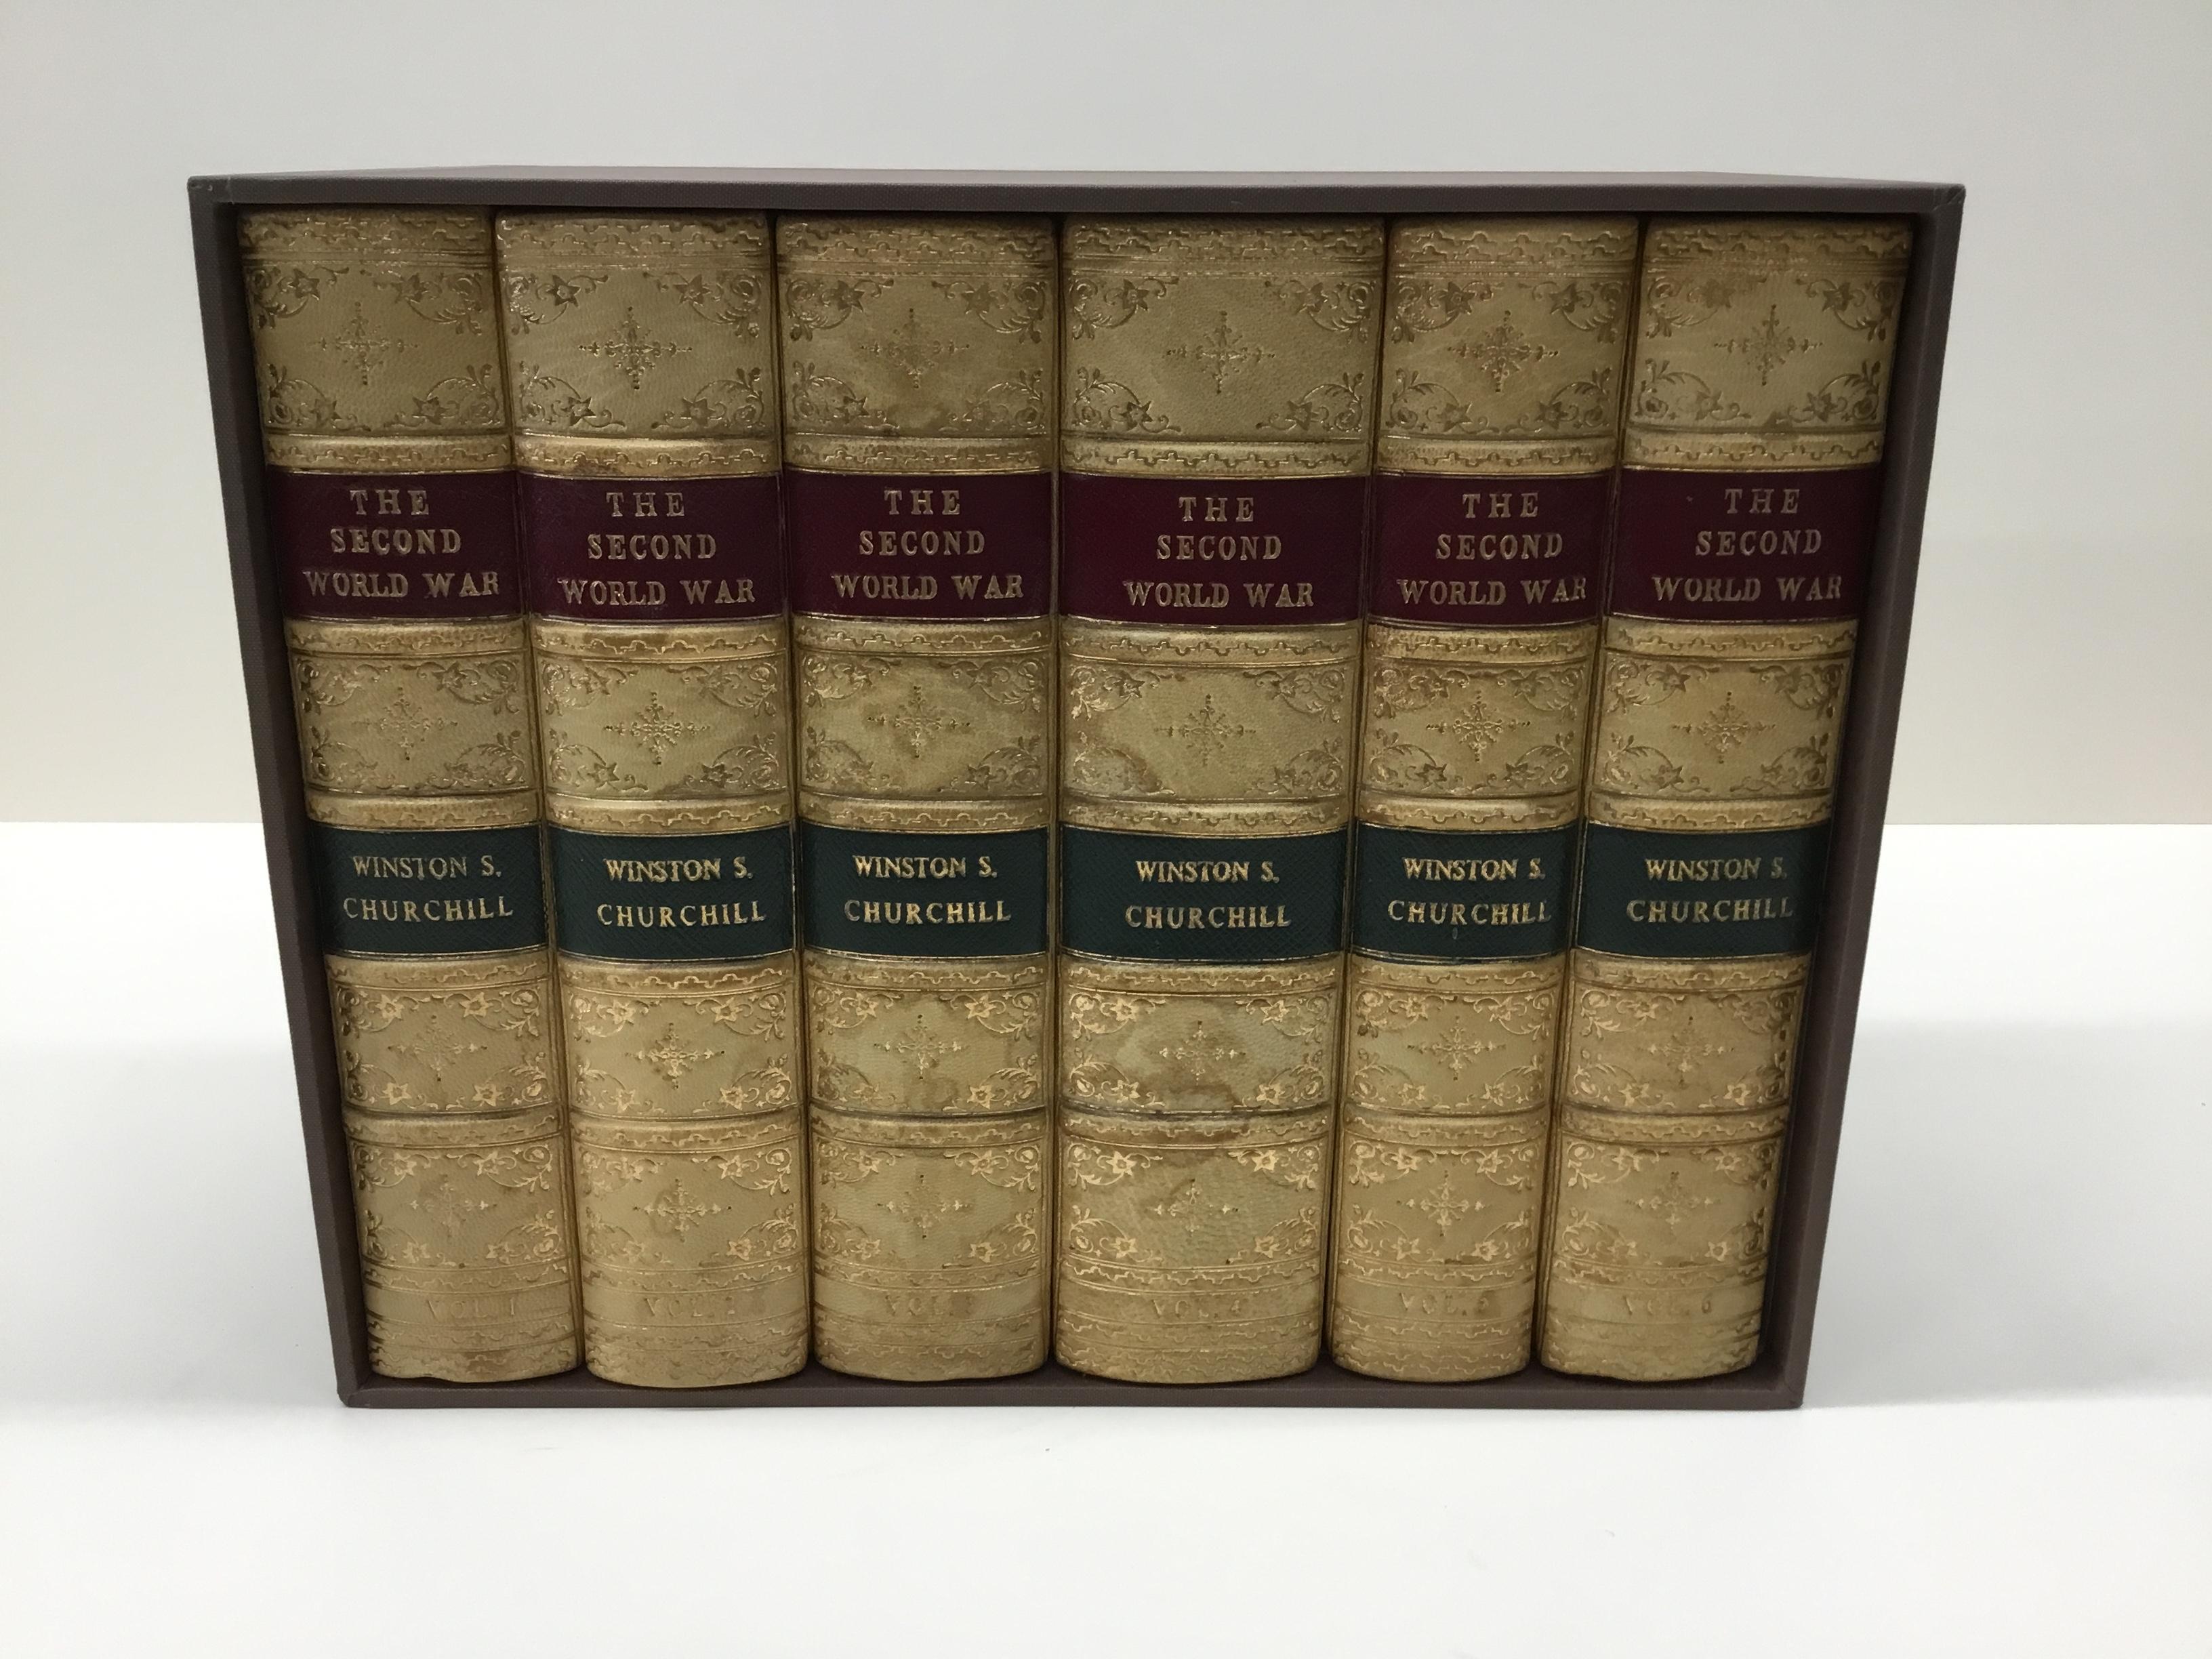 This is Winston S. Churchill’s complete six-volume Classic history of the Second World War. The set is signed by Winston Churchill himself, with a signature on the fifth volume. The set includes: “The Gathering Storm,” “Their Finest Hour,” “The